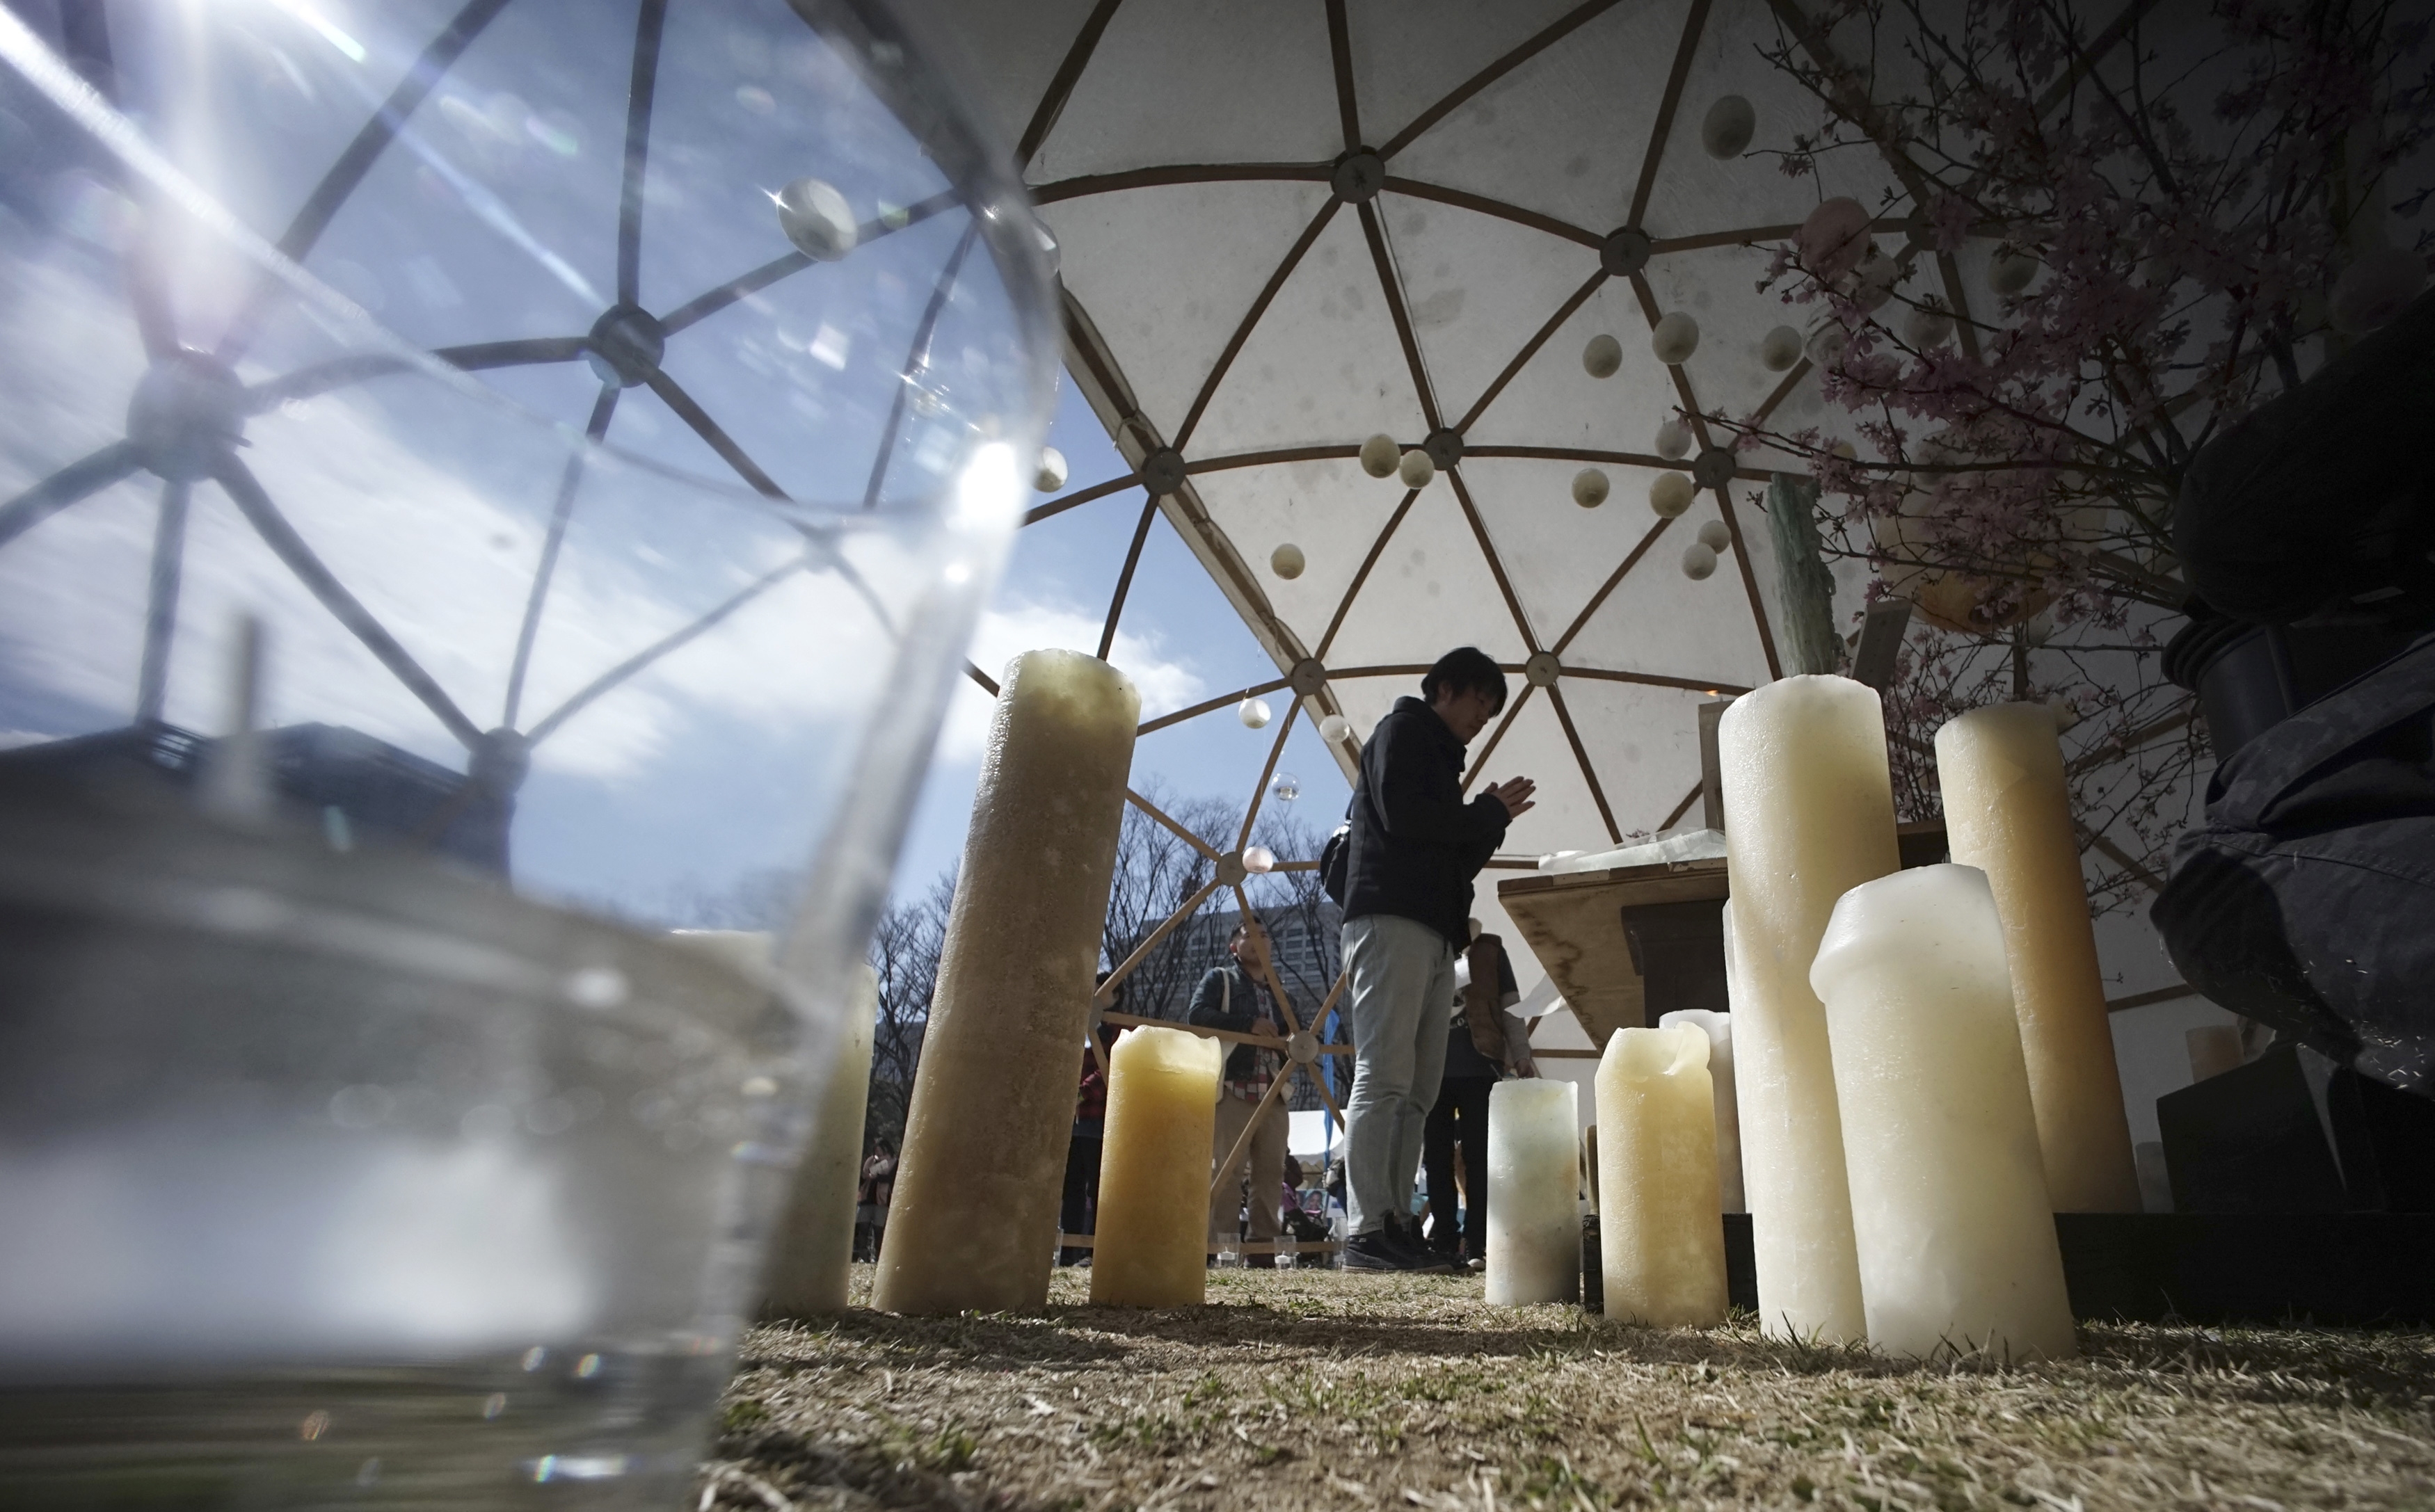 A man prays to mourn for victims of the March 11, 2011 earthquake and tsunami prior to a special memorial event in Tokyo, Saturday, March 11, 2017. Japan on Saturday marked the sixth anniversary of the 2011 tsunami that killed more than 18,000 people and left a devastated coastline along the country's northeast that has still not been fully rebuilt. (AP Photo/Eugene Hoshiko)